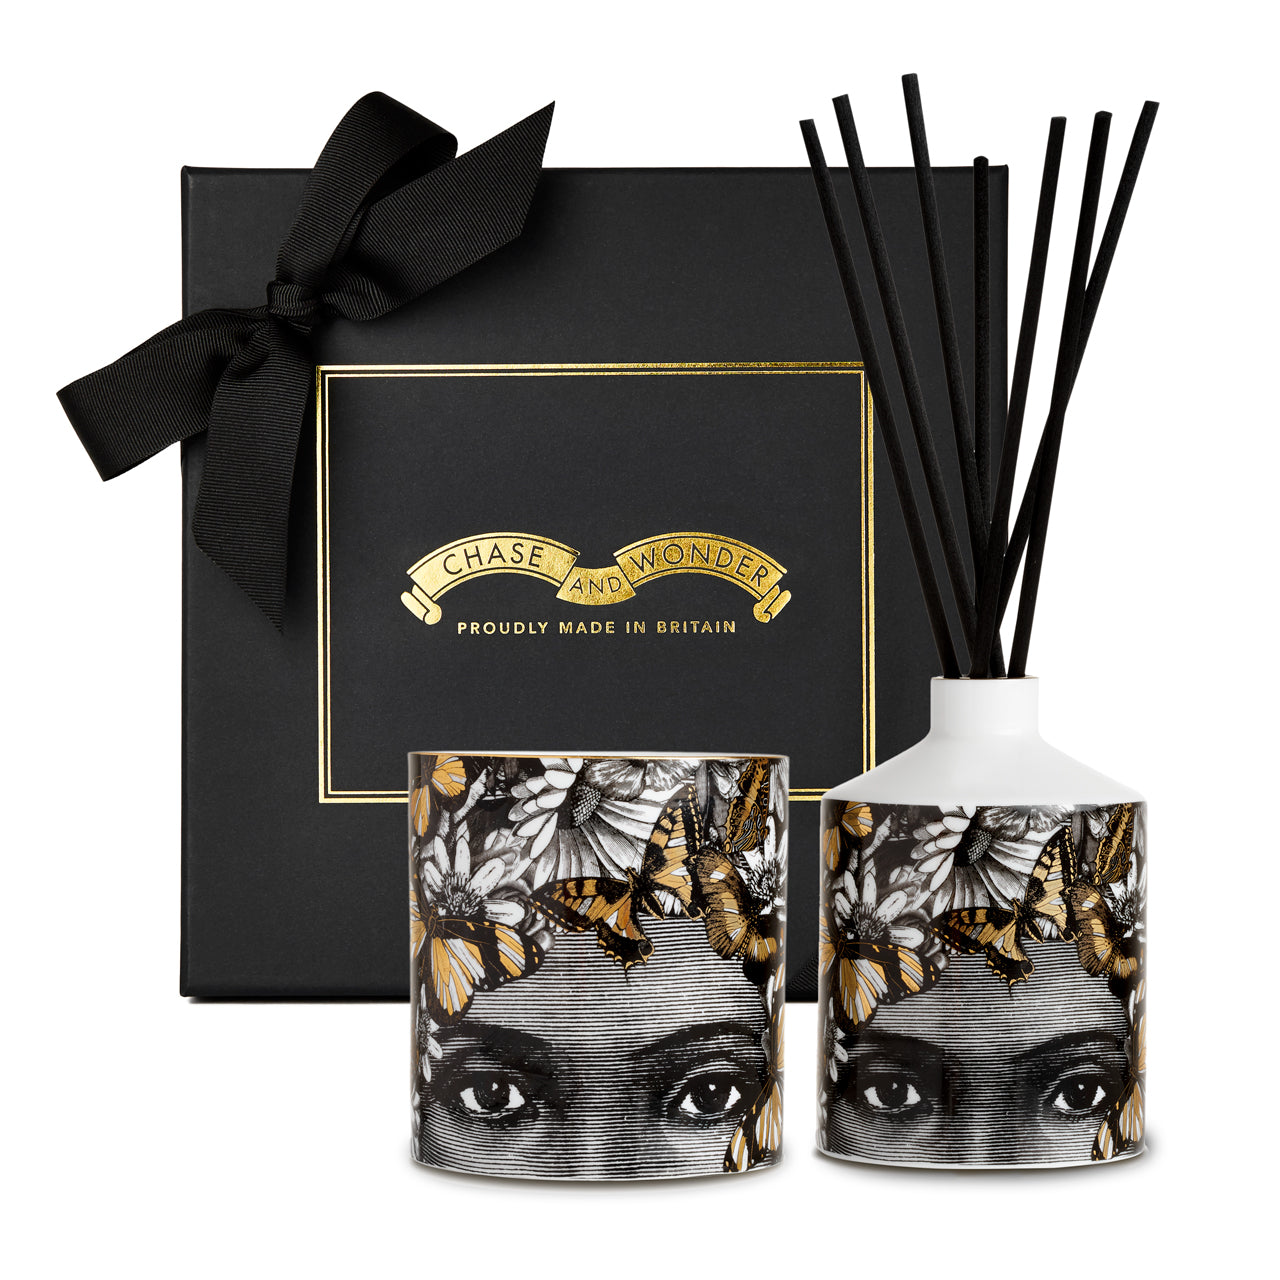 The Butterfly Lady Gift Set